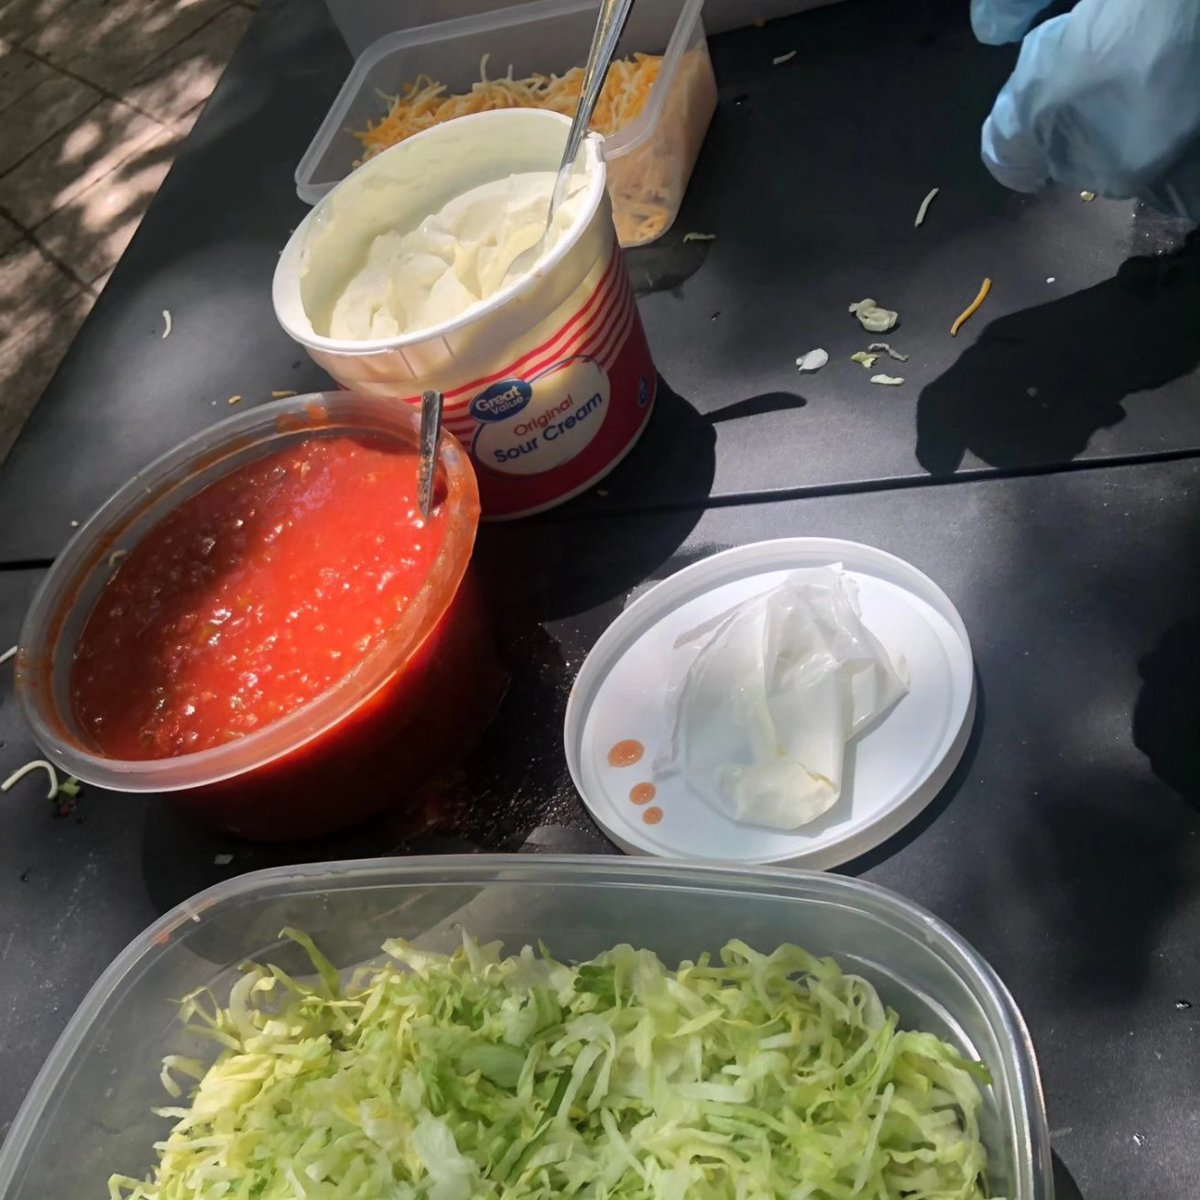 Tacos were a hit today. Help us keep it going. We fed around 200 beautiful people. Cashapp: $ATLmutualfund Venmo: @ATLmutualfund #MutualAid #FoodisaRight #feedyoursoul